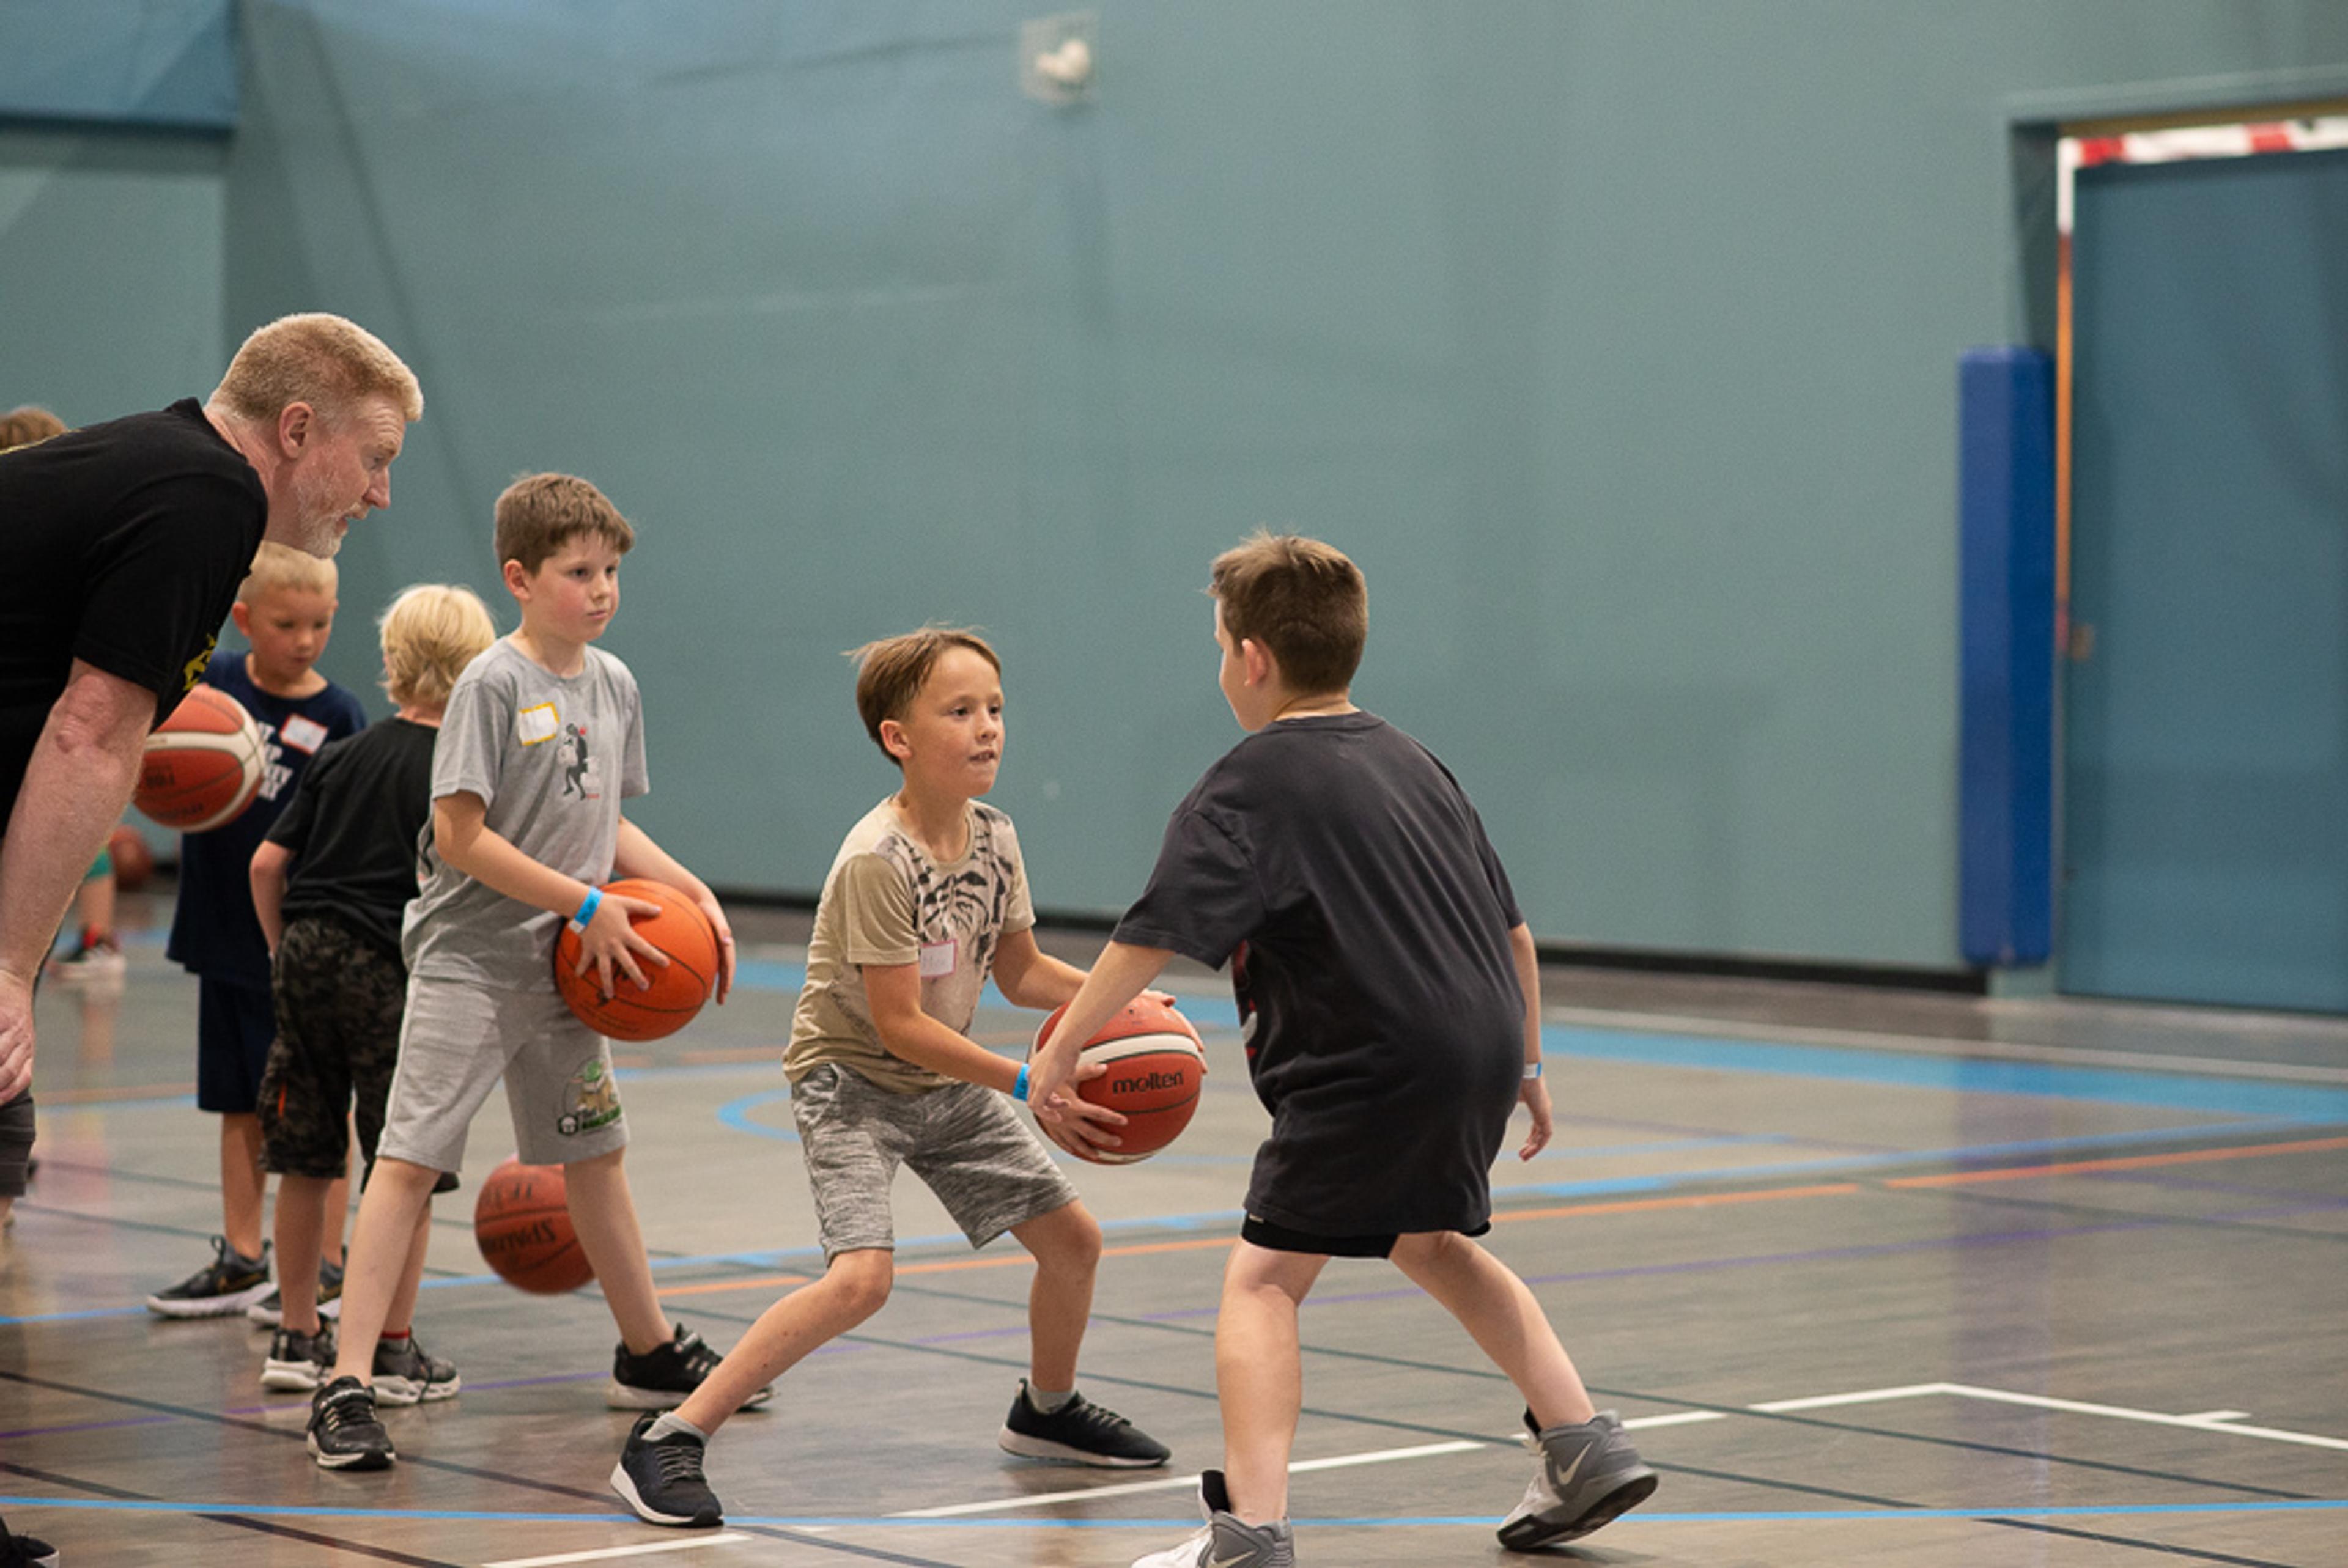 A group of children practicing a basketball drill at the SLS Centre.